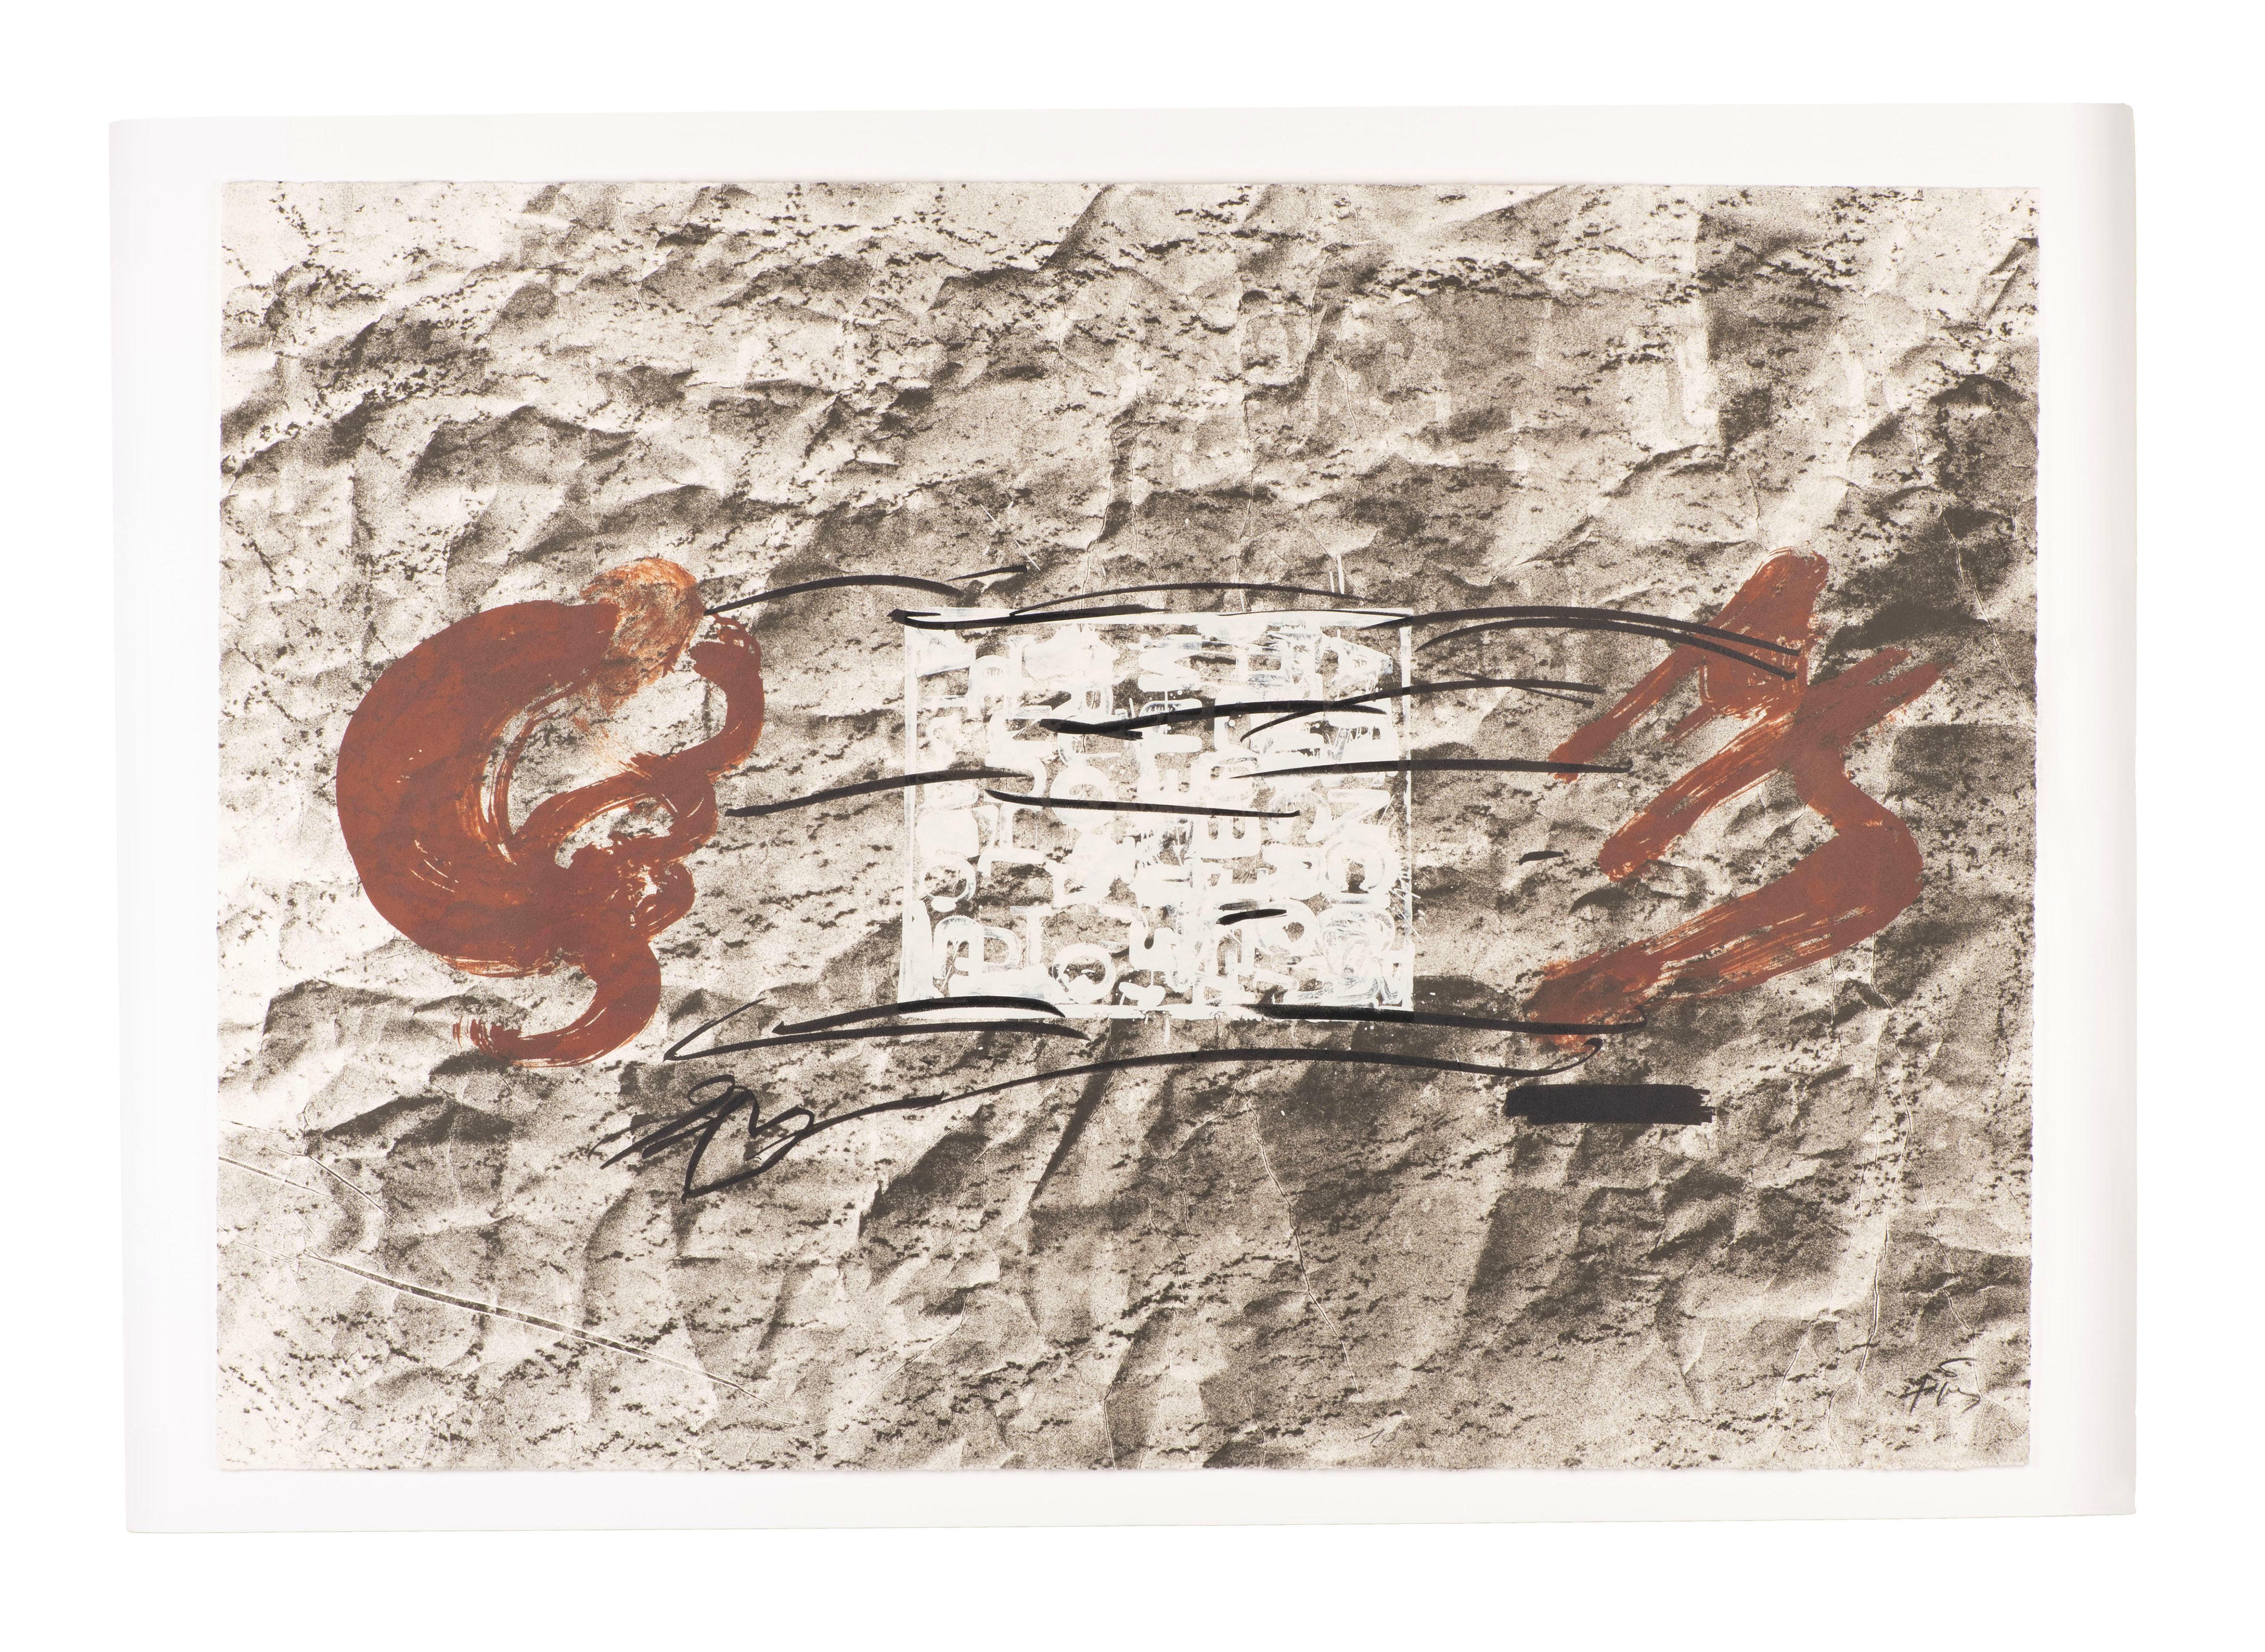 Antoni Tàpies combined rich conceptual concerns with material experimentation and monumental scales. His work was variously informed by early modernists including Paul Klee and Joan Miró and by Art Informel artists, such as Jean Dubuffet, who were